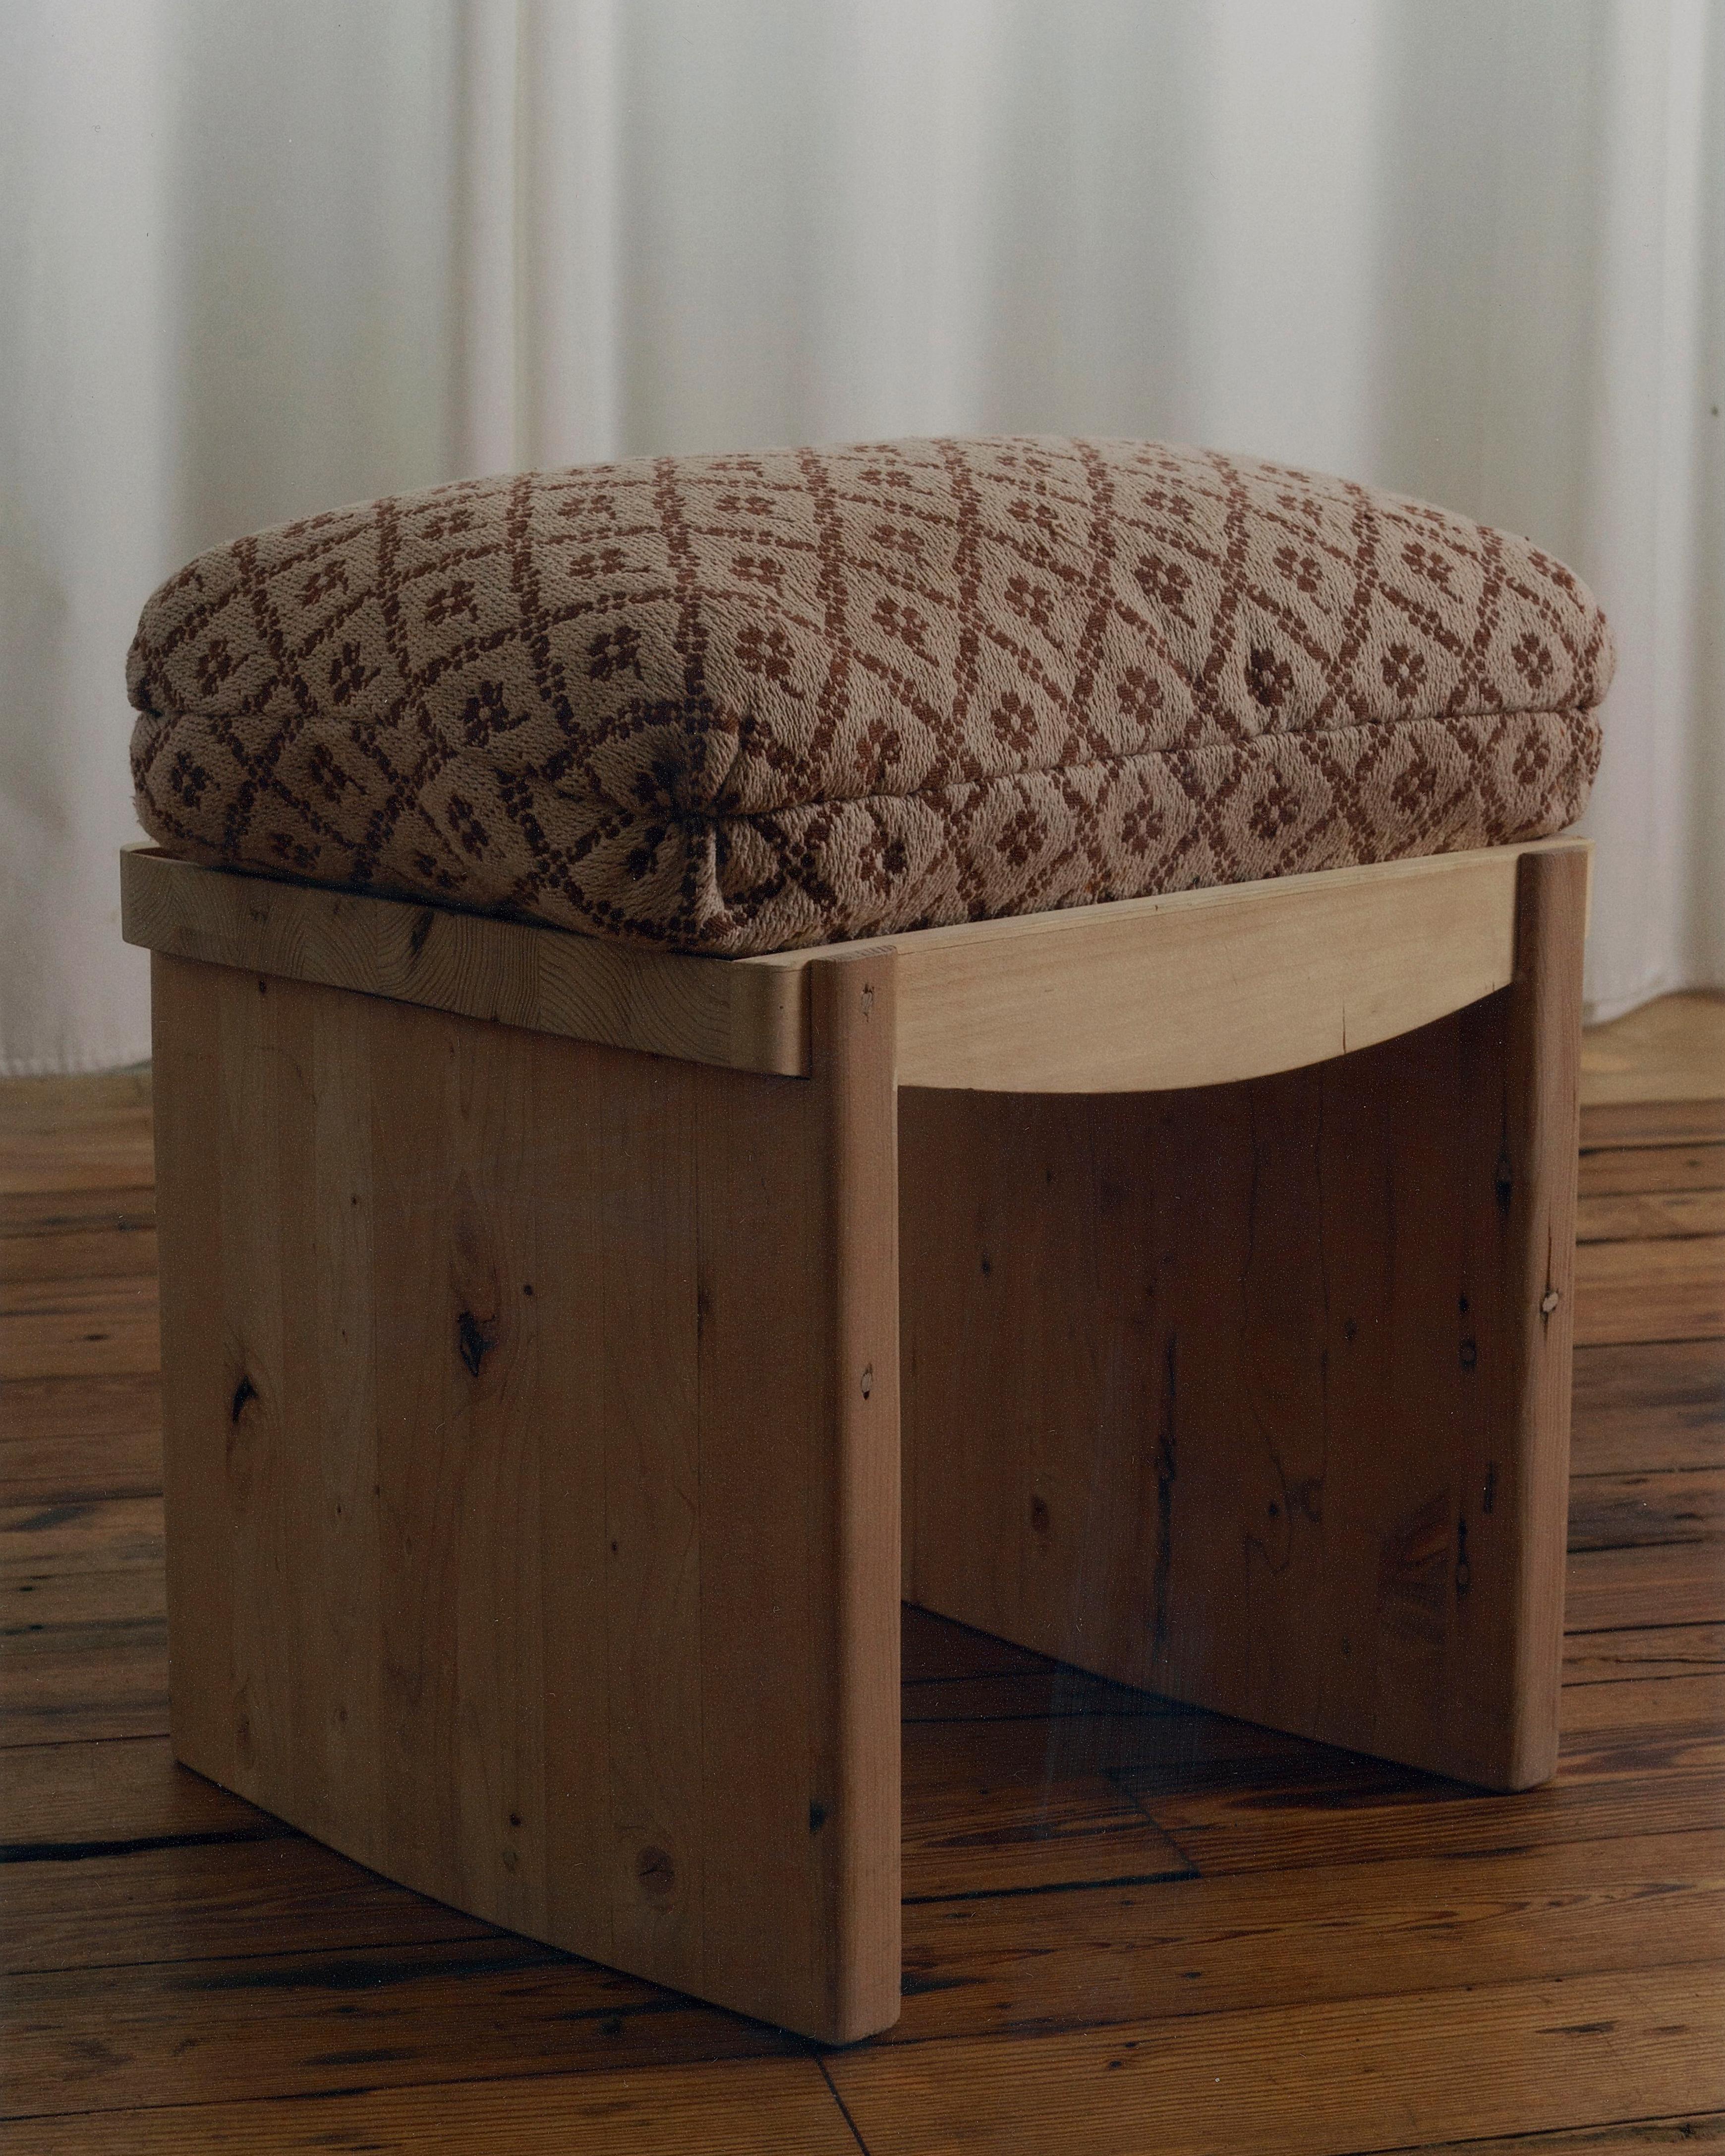 Made entirely of solid hardwood, every component is shaped and finished by hand. The carved seat has a gentle interior curve, with a Turkish corner cushion placed within the recess. 
Available in Rustic Oak & Walnut and Vintage fabric. This item is